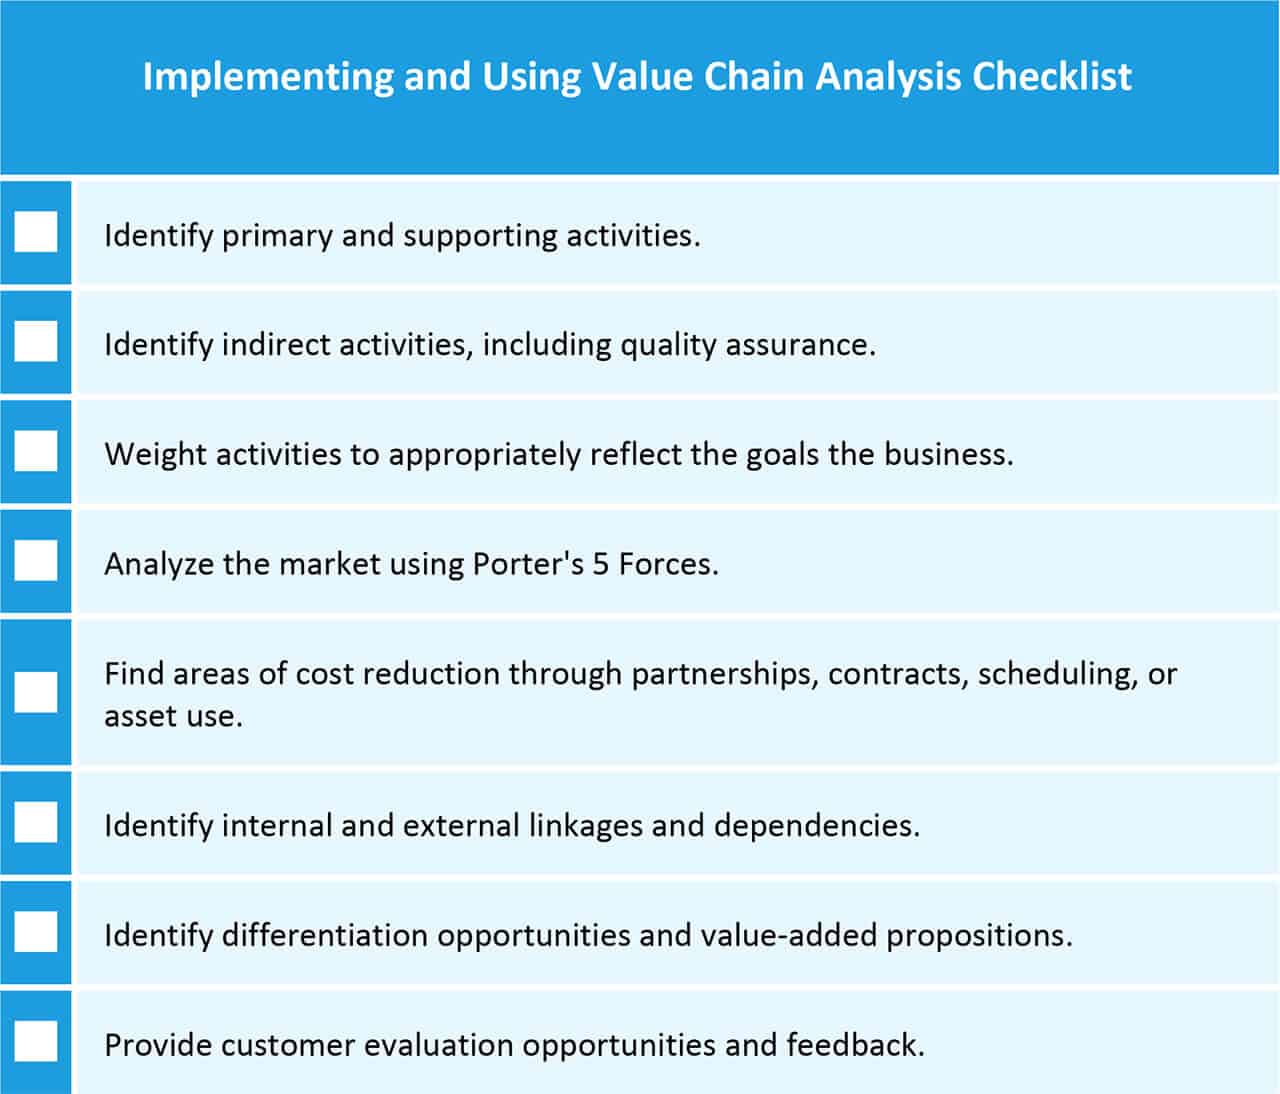 Implementing and using value chain analysis